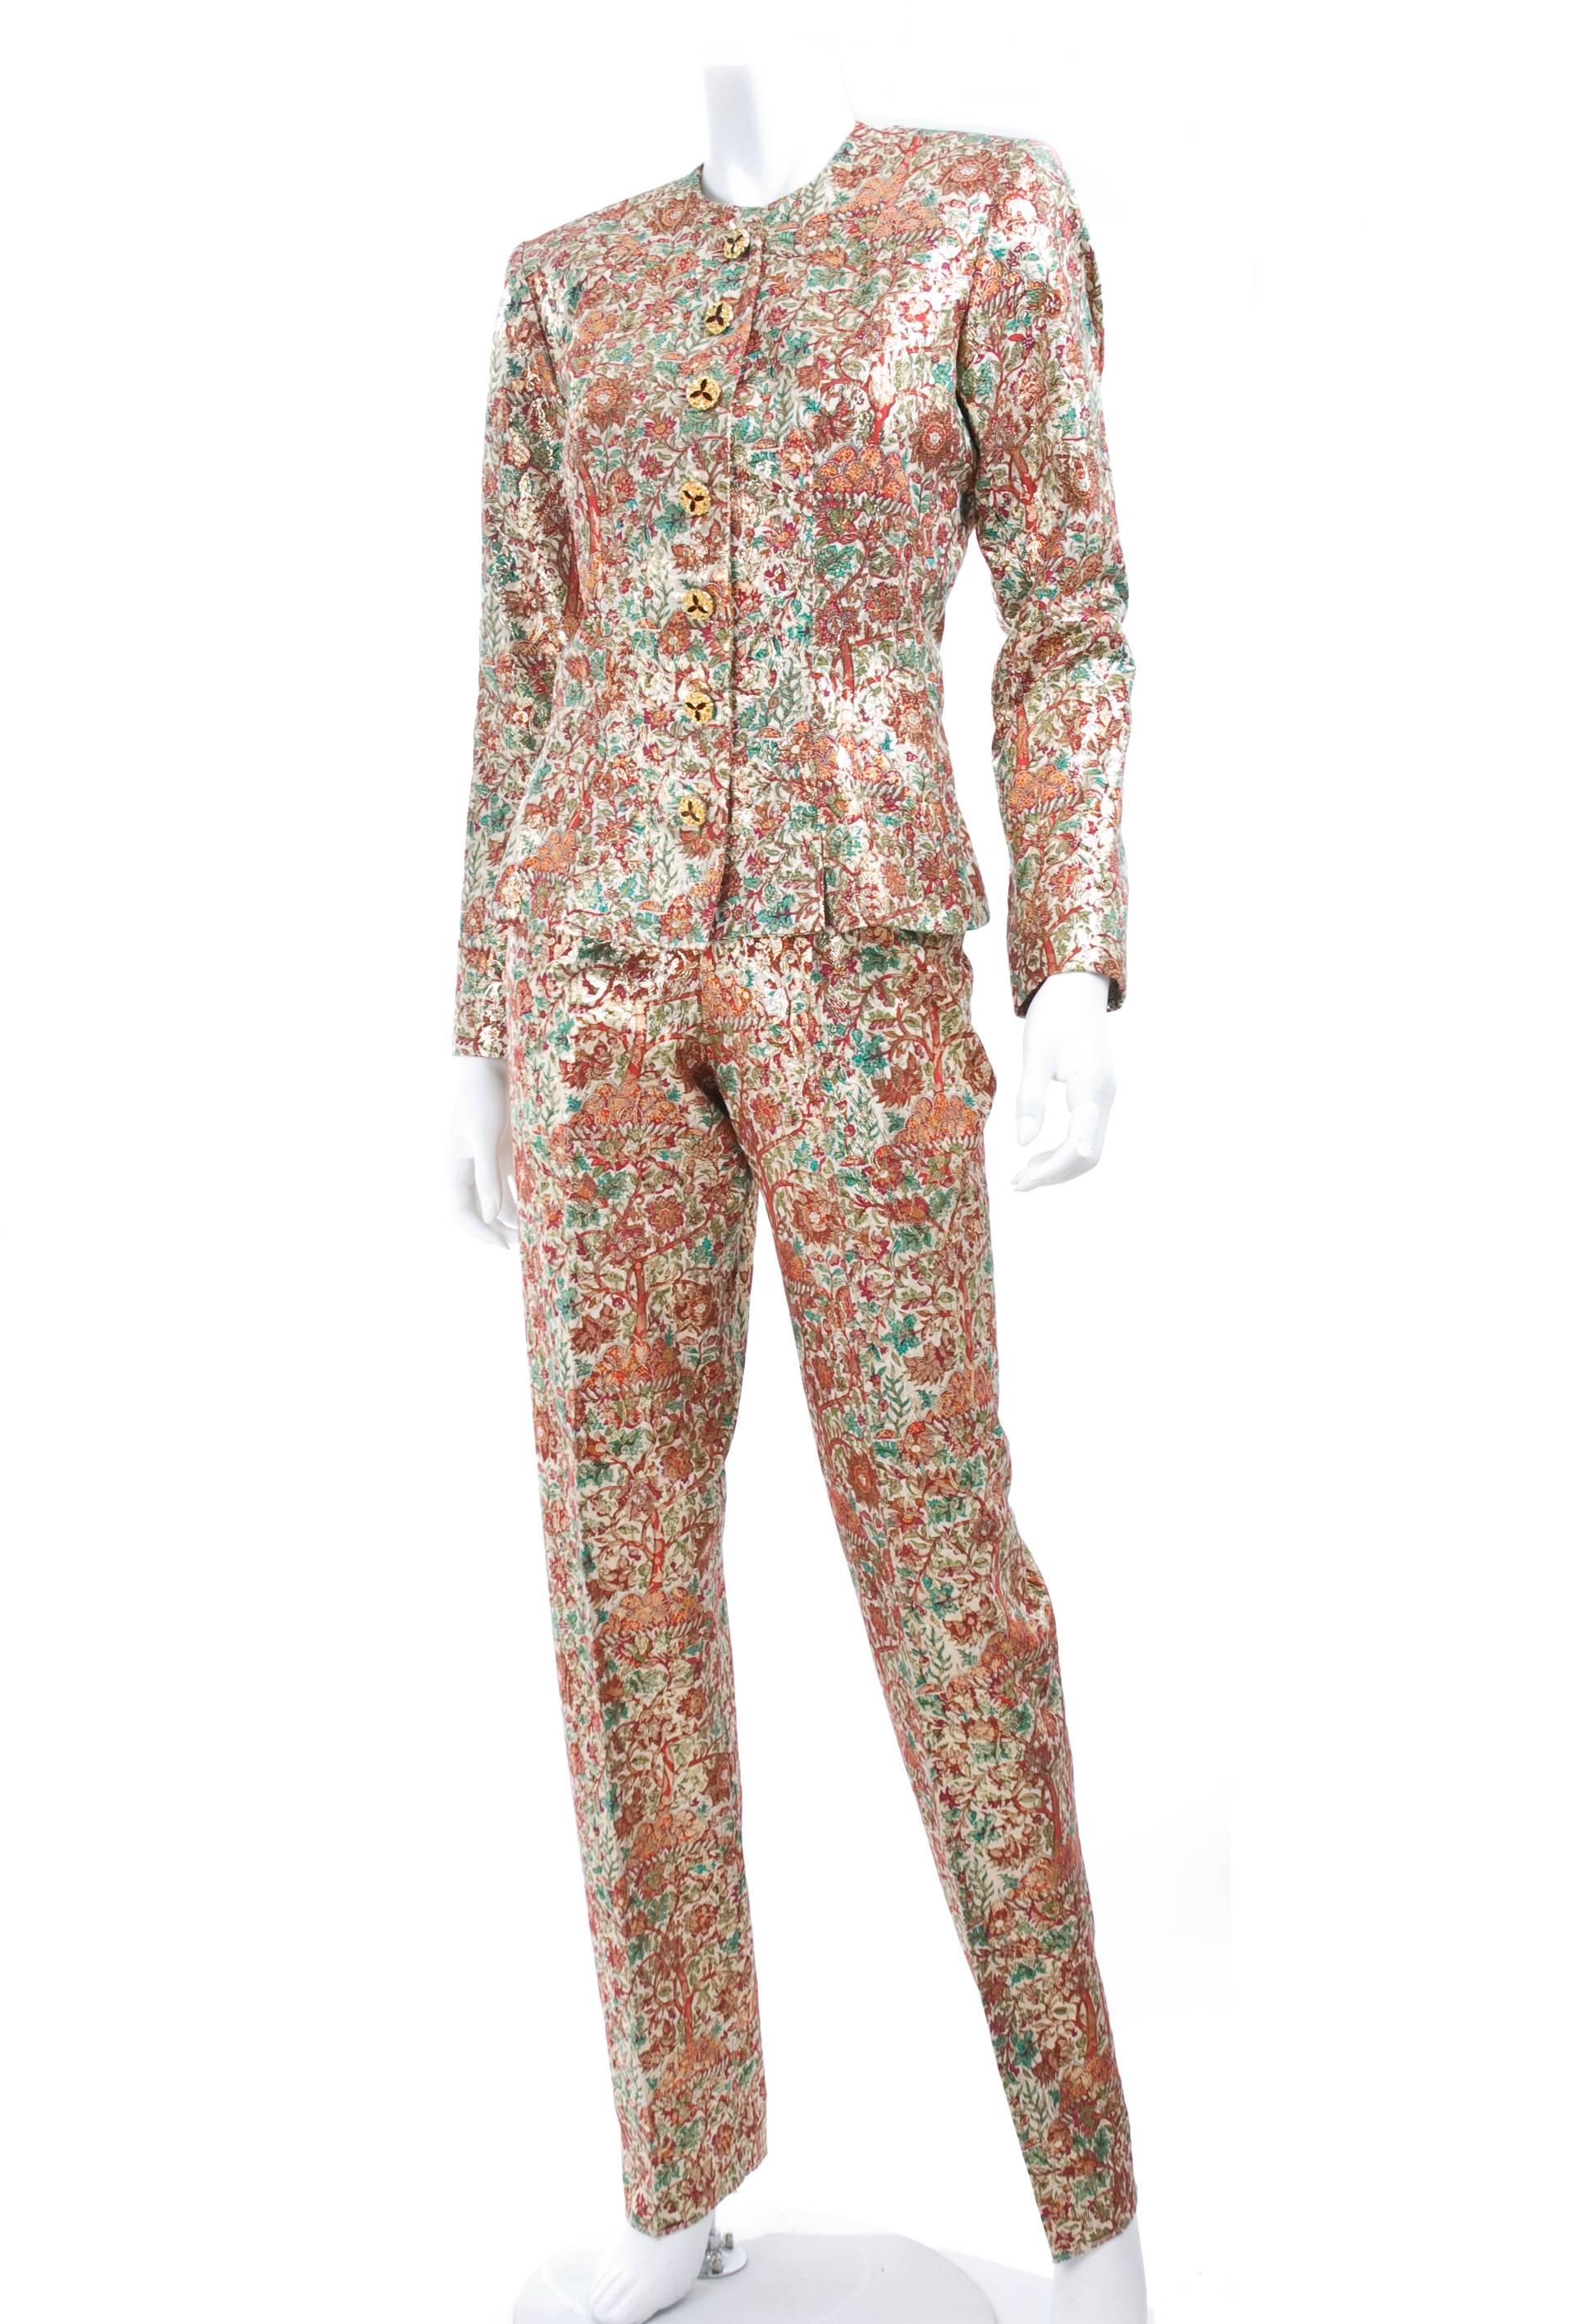 Vintage Yves Saint Laurent gold brocade suit in creme, red and green floral pattern. The Pants are high waisted and have side pockets.
Gilded buttons with red rhinestones.
Excellent condition - looks unworn
Material label is missing, feels like